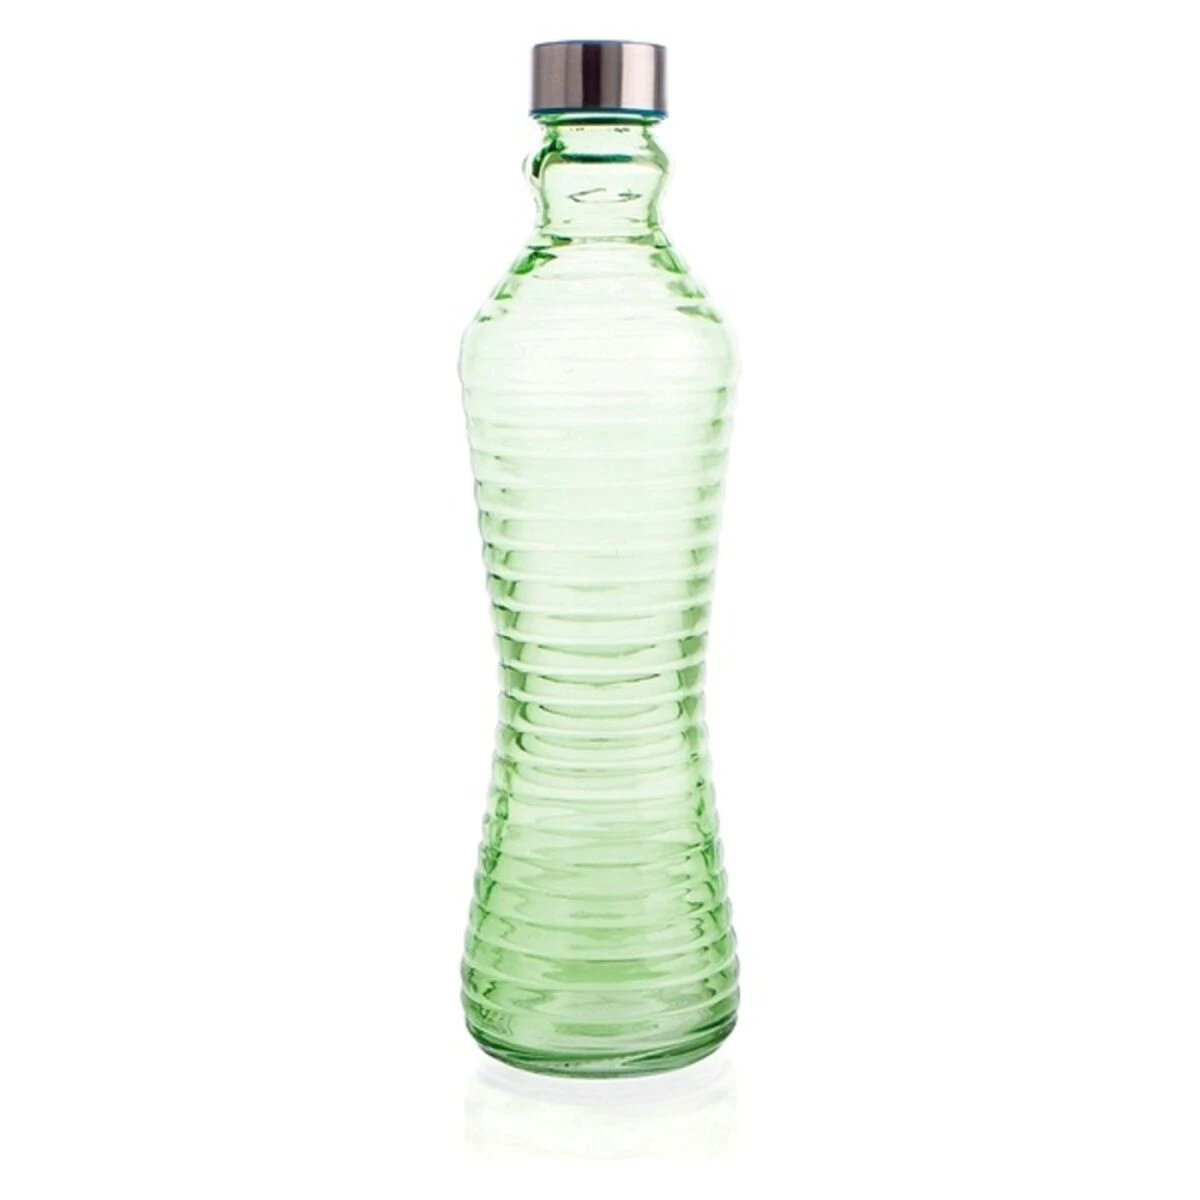 Green glass bottle with cap.